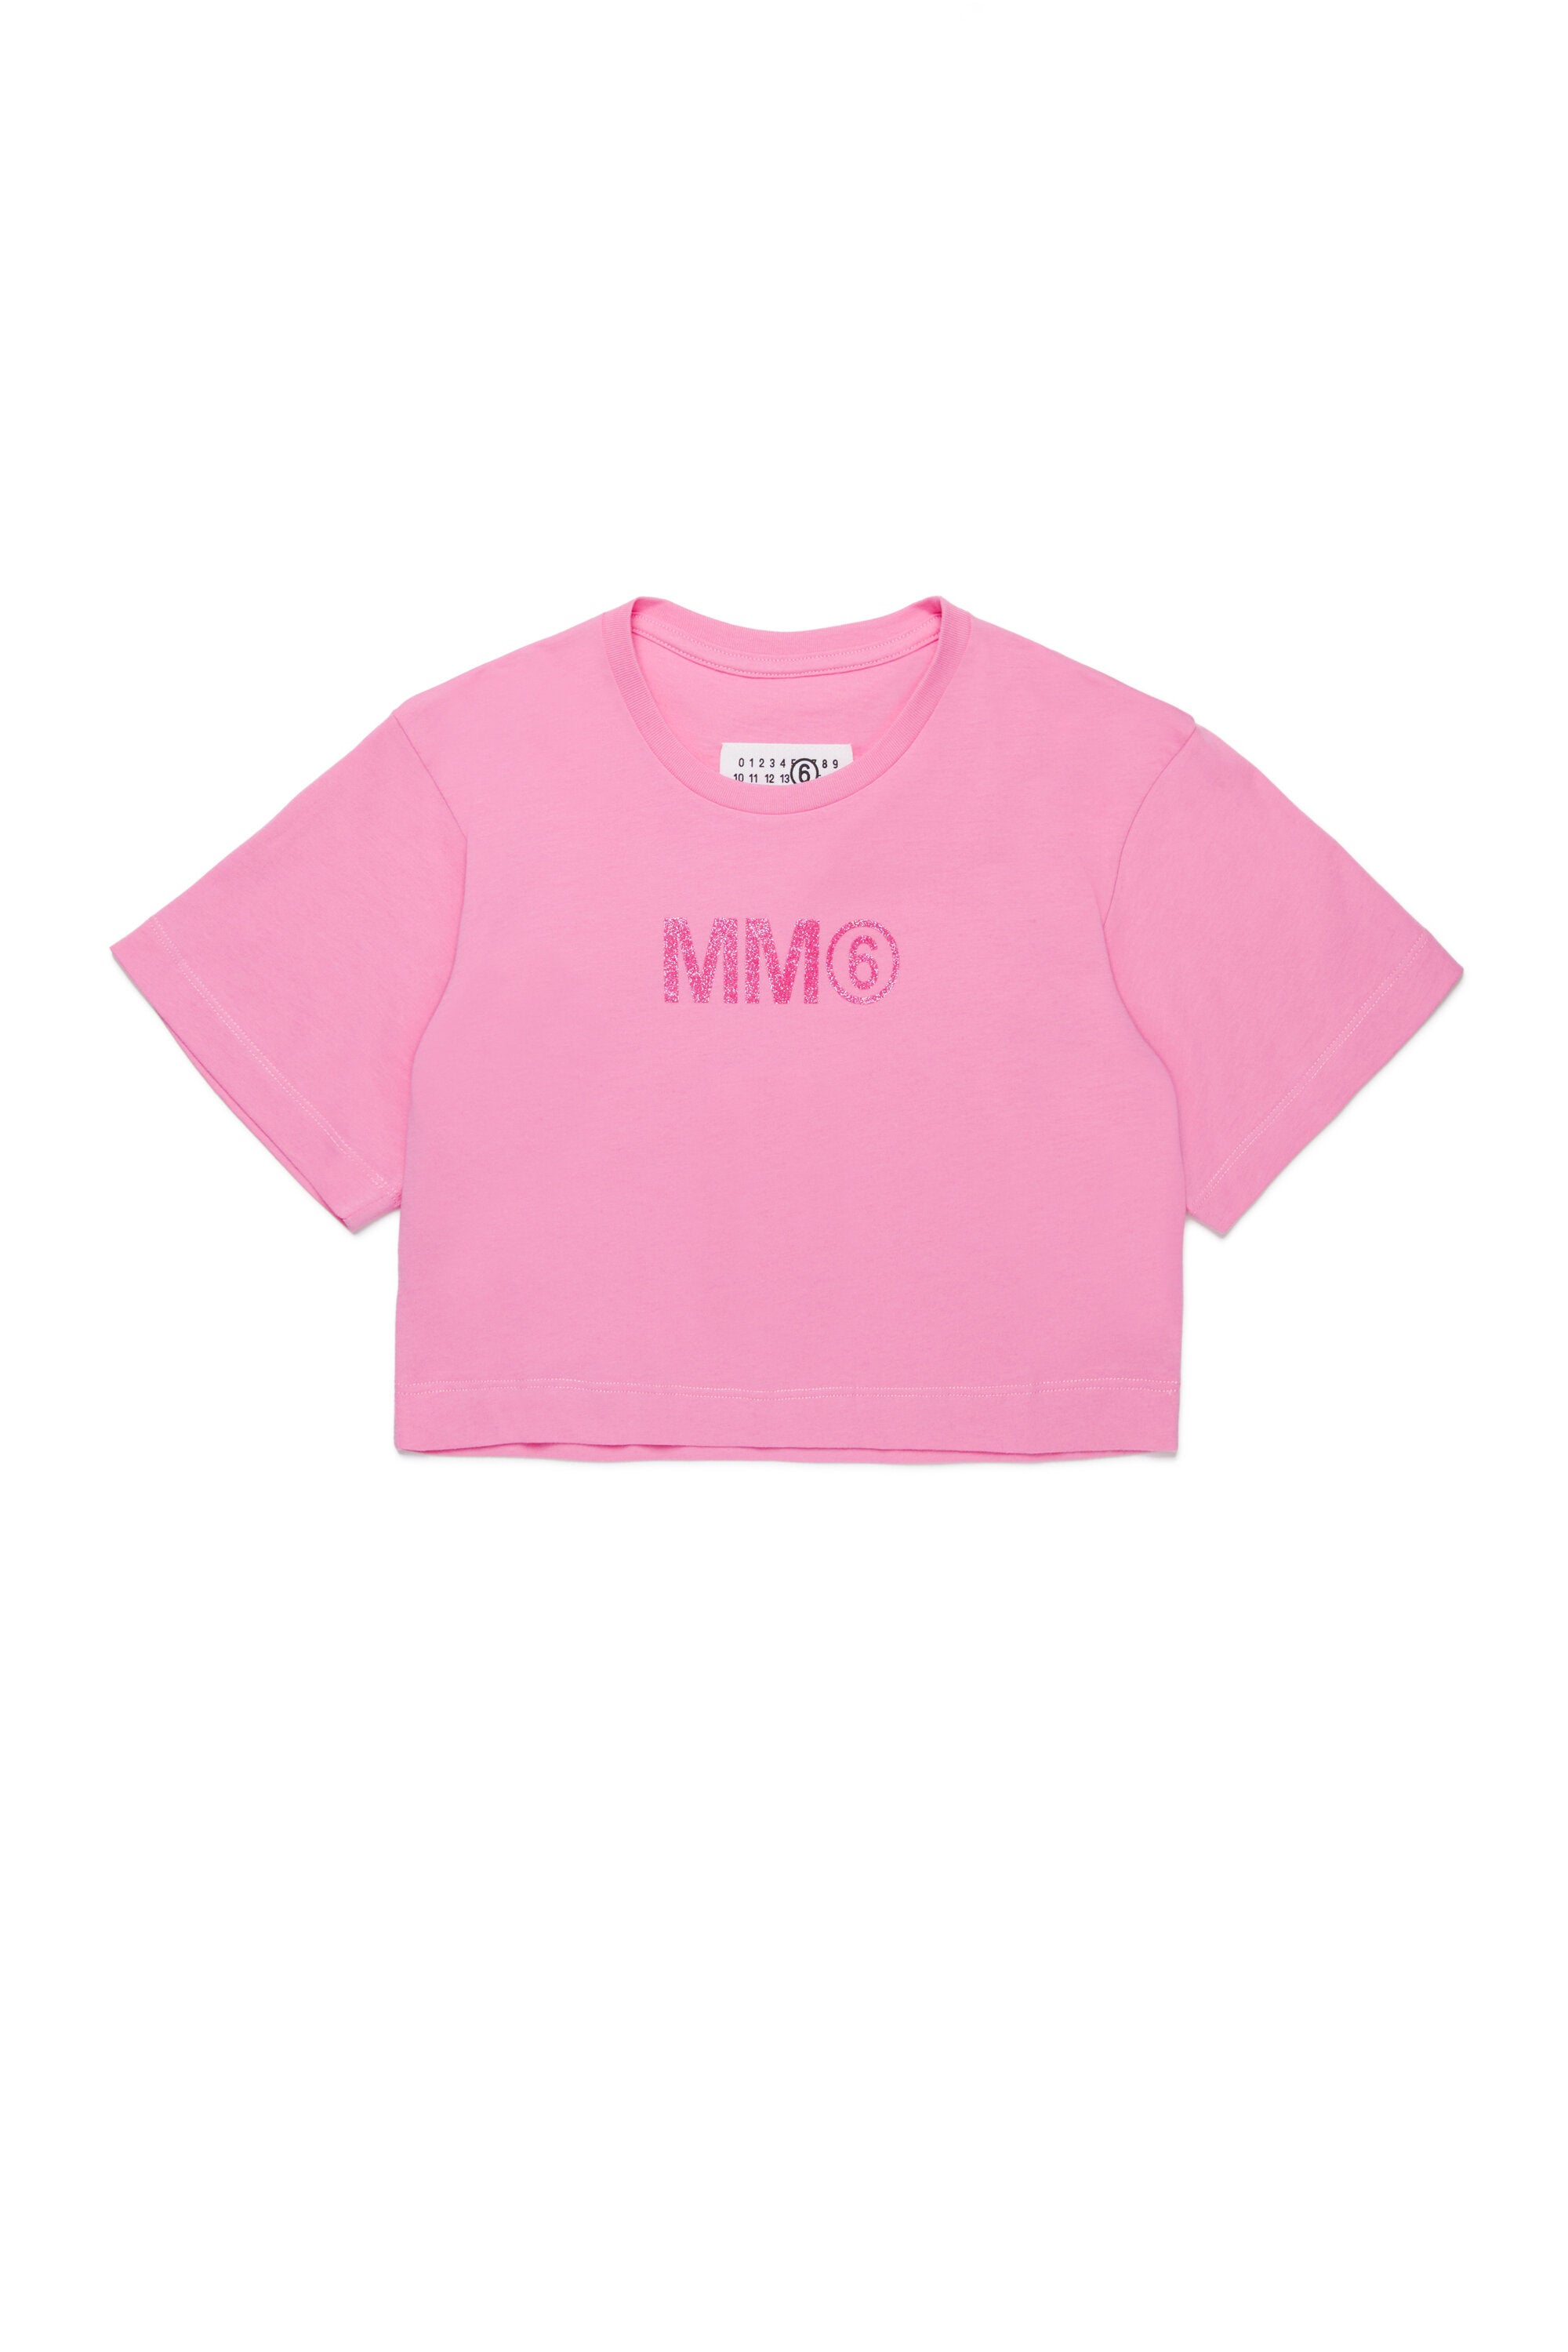 Cropped T-shirt branded with MM6 glitter logo